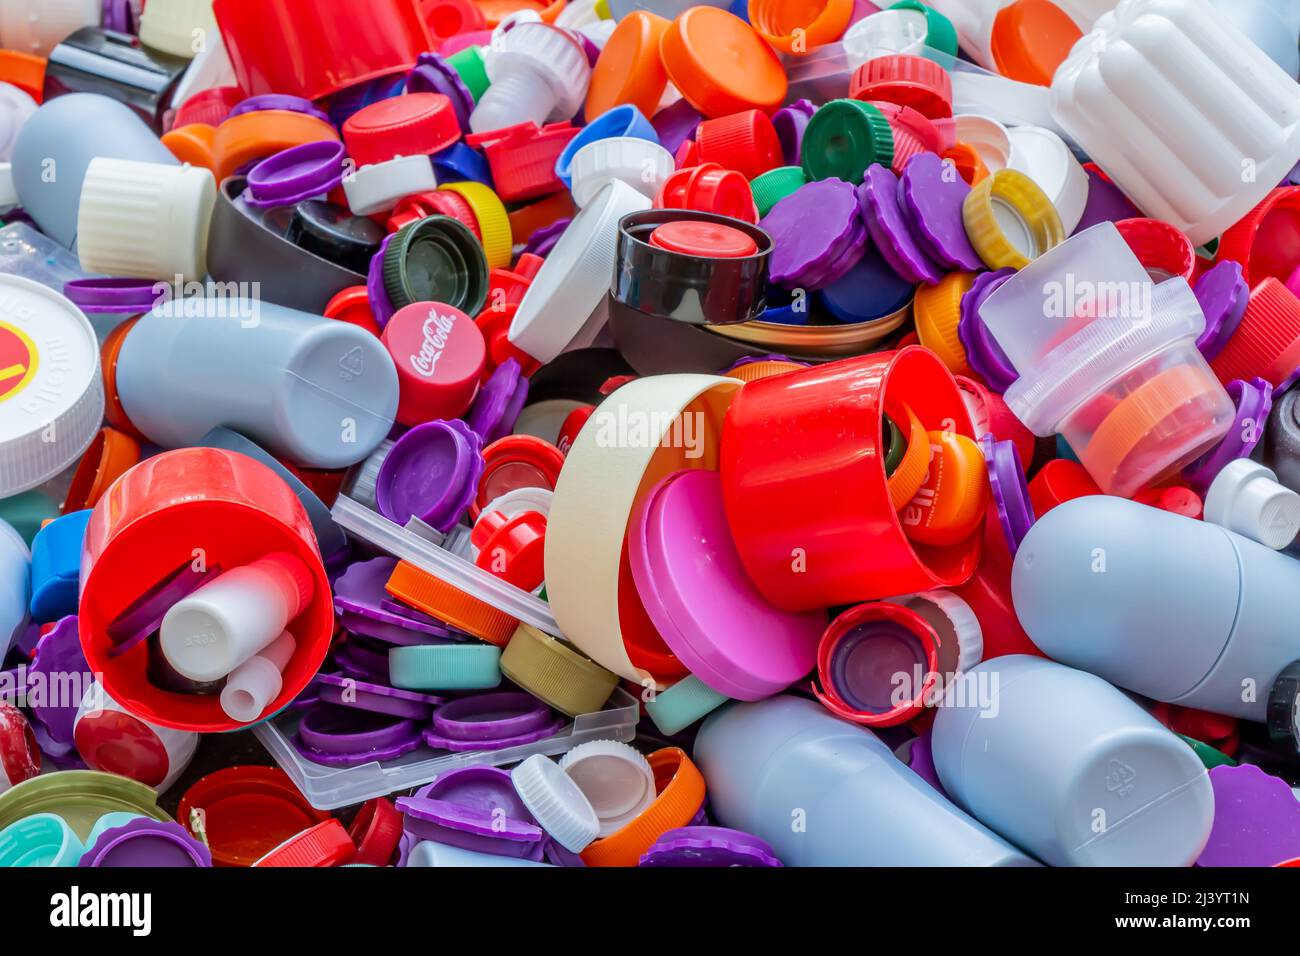 https://c8.alamy.com/comp/2J3YT1N/berlin-germany-12052018-enormous-quantity-of-plastic-caps-in-golden-red-green-blue-white-silver-etc-recycling-environment-ecology-2J3YT1N.jpg